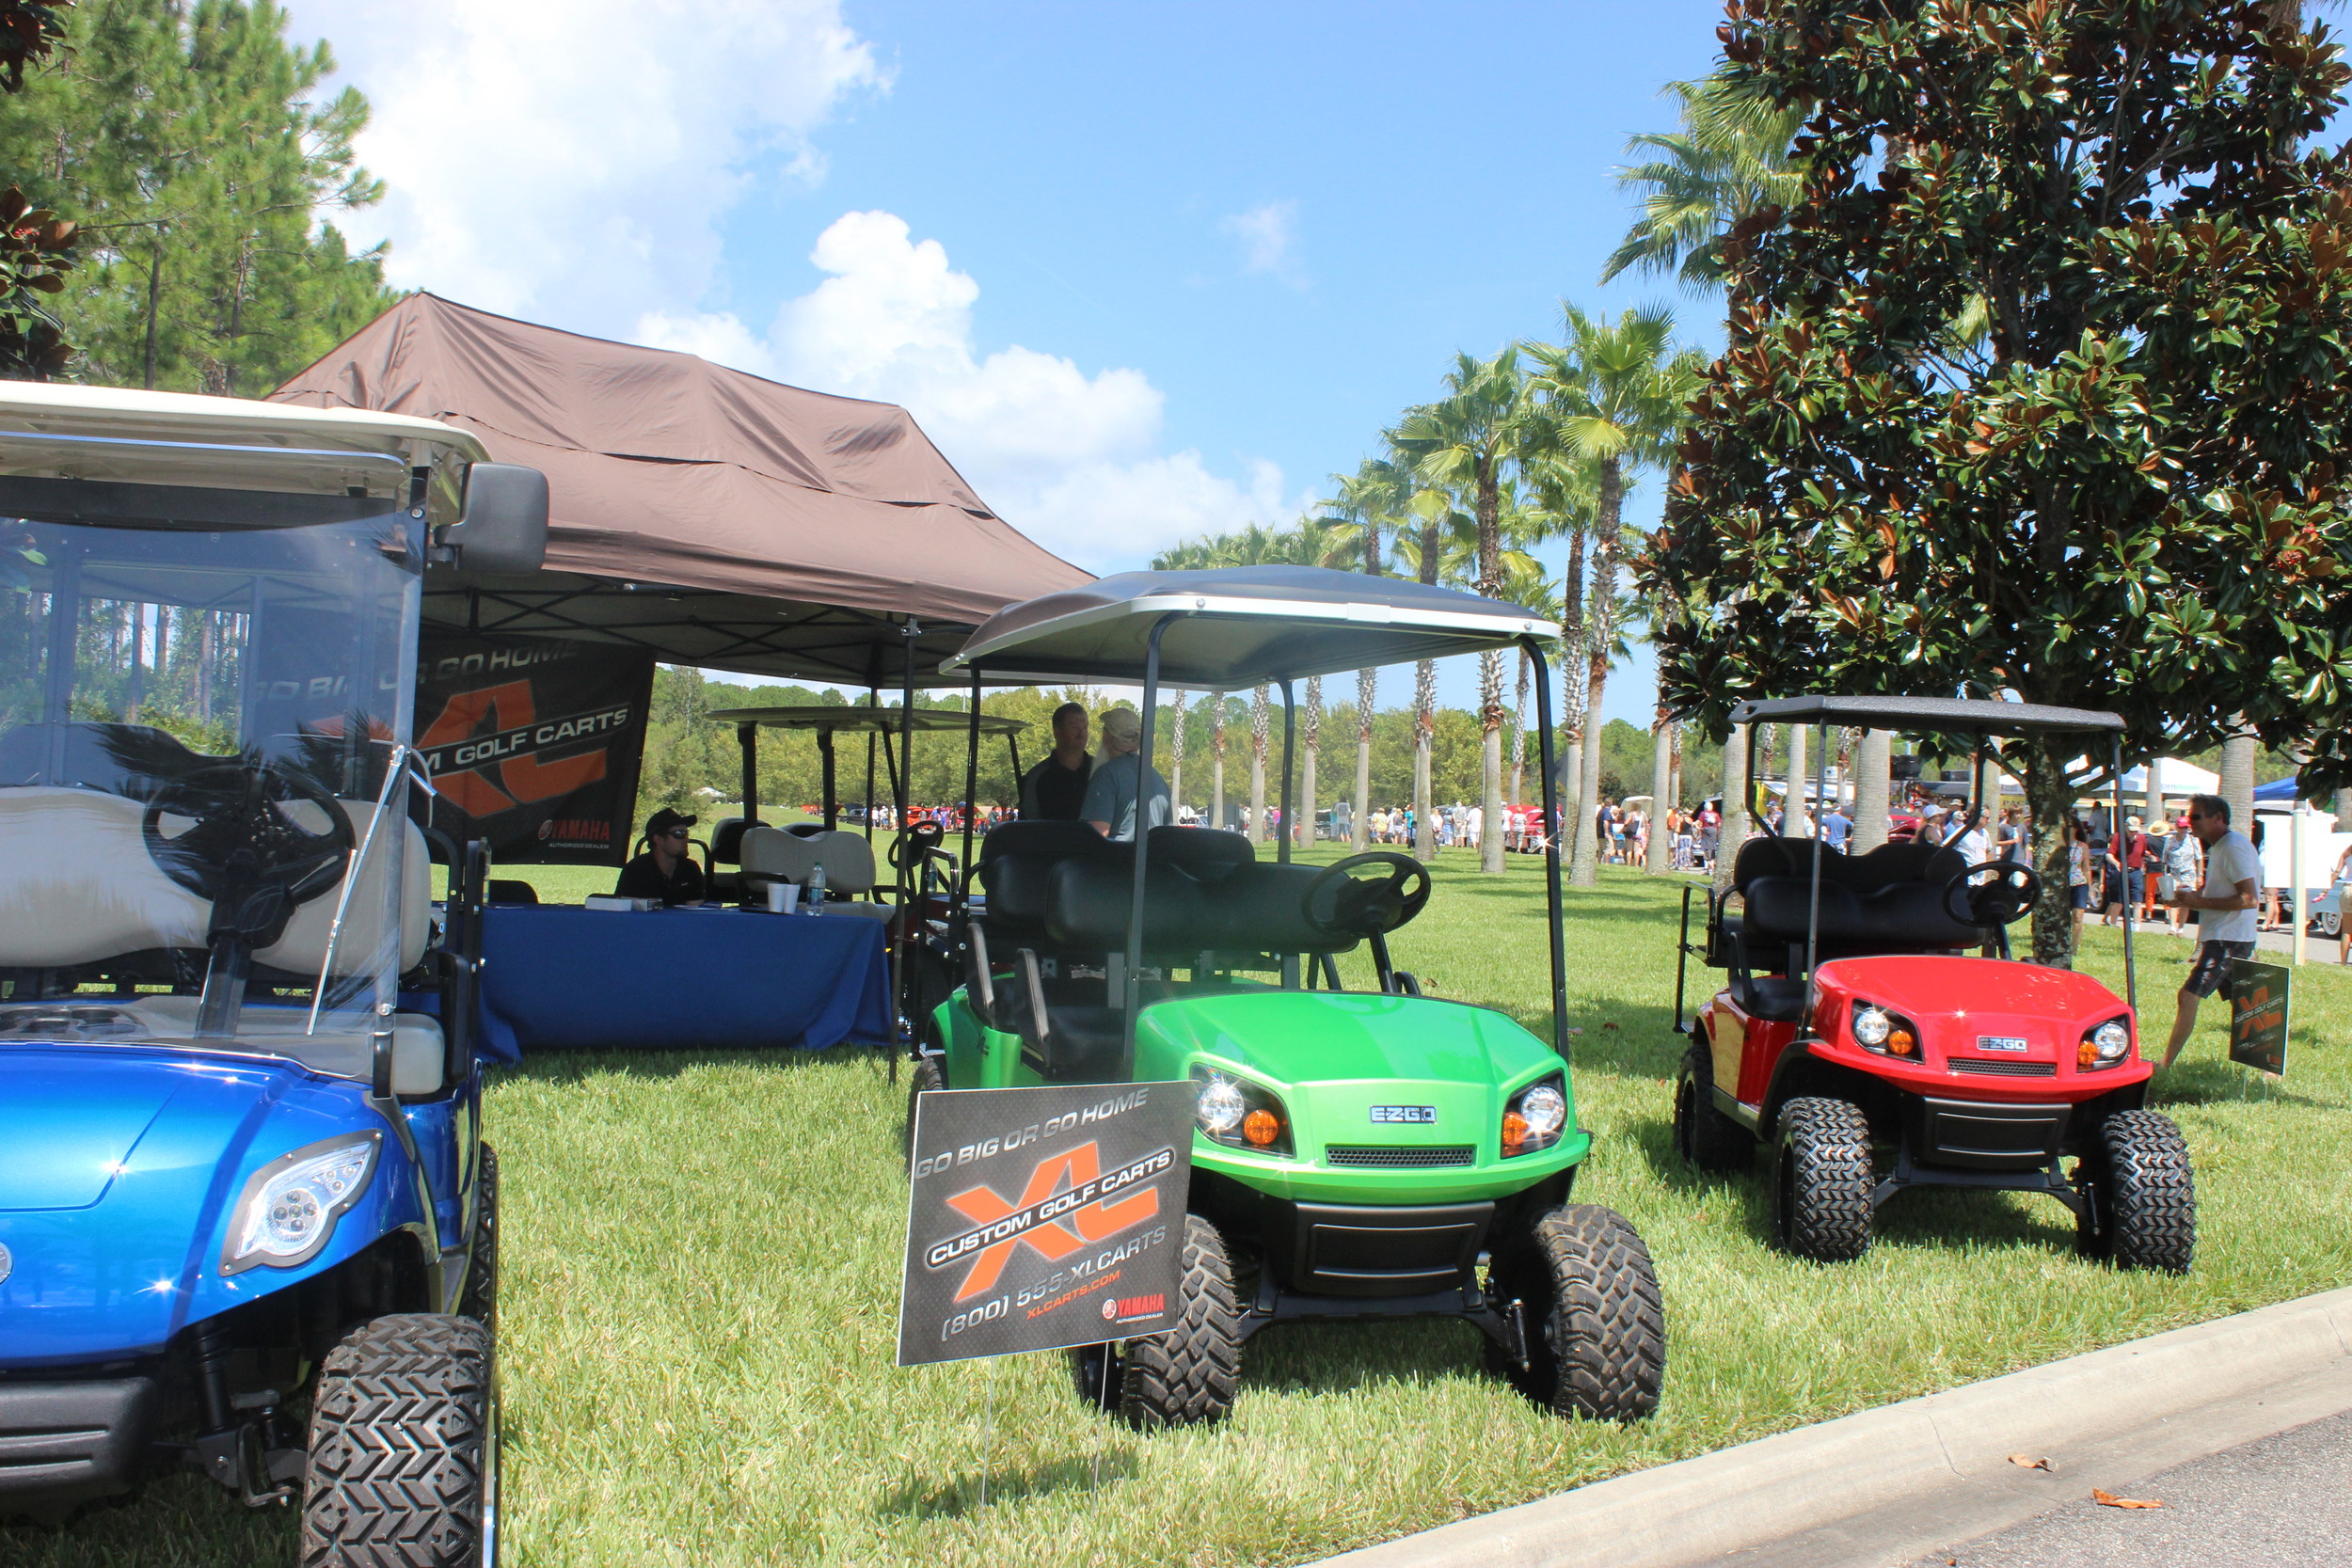 This year’s Auto Show featured a category for golf carts.